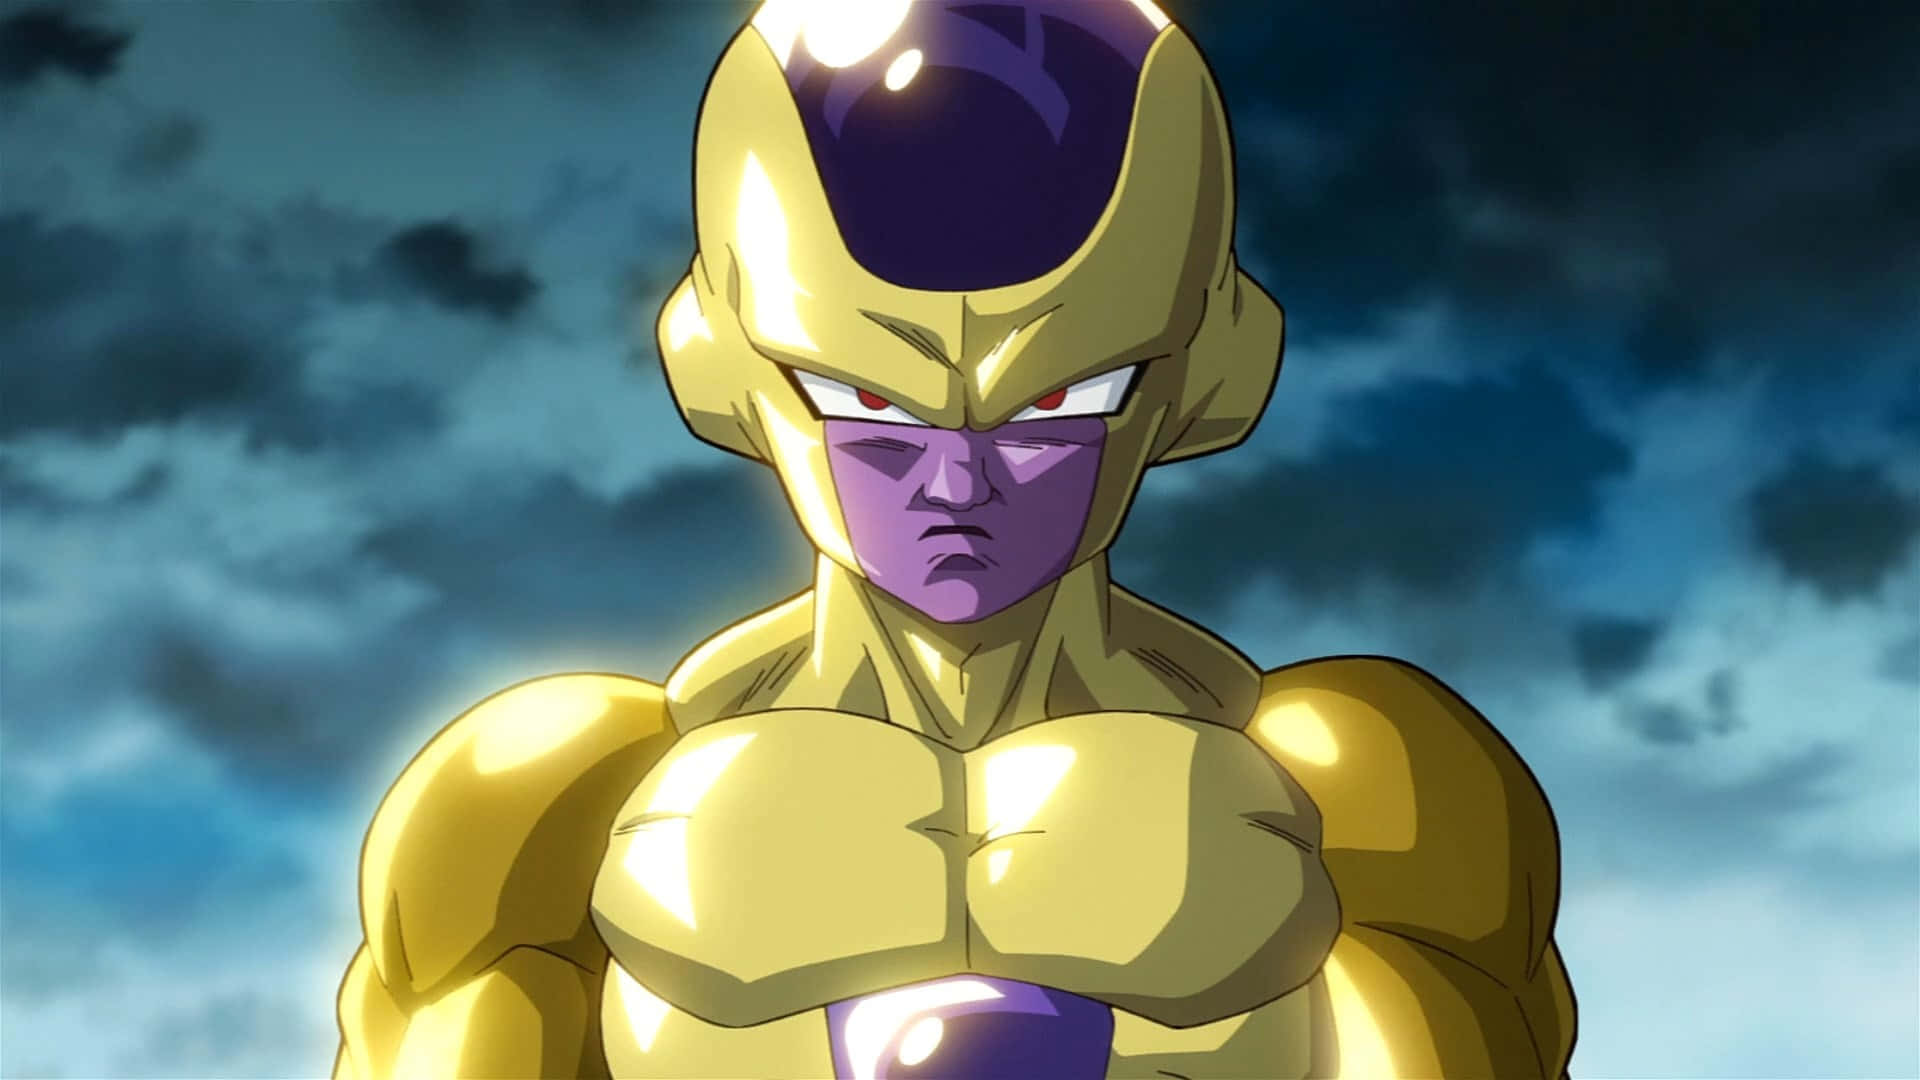 /Title: "Powerful and Majestic Golden Frieza" Wallpaper